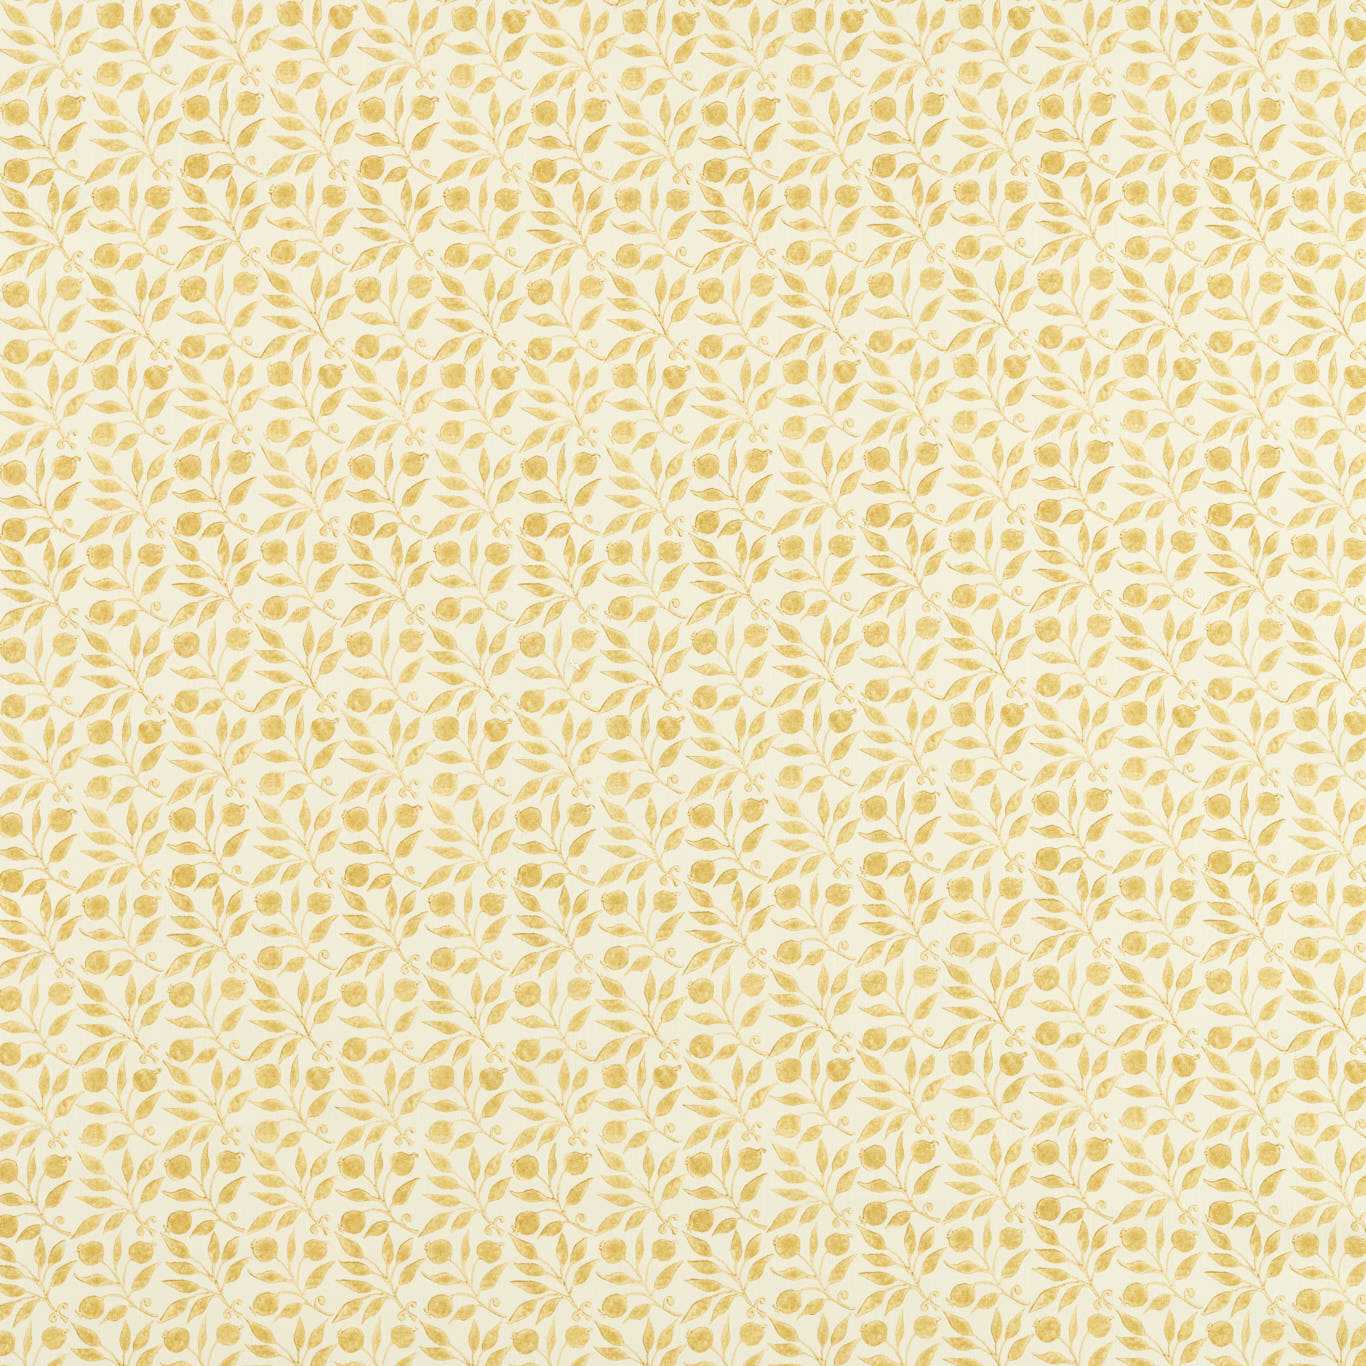 Rosehip Wheat Fabric by MOR